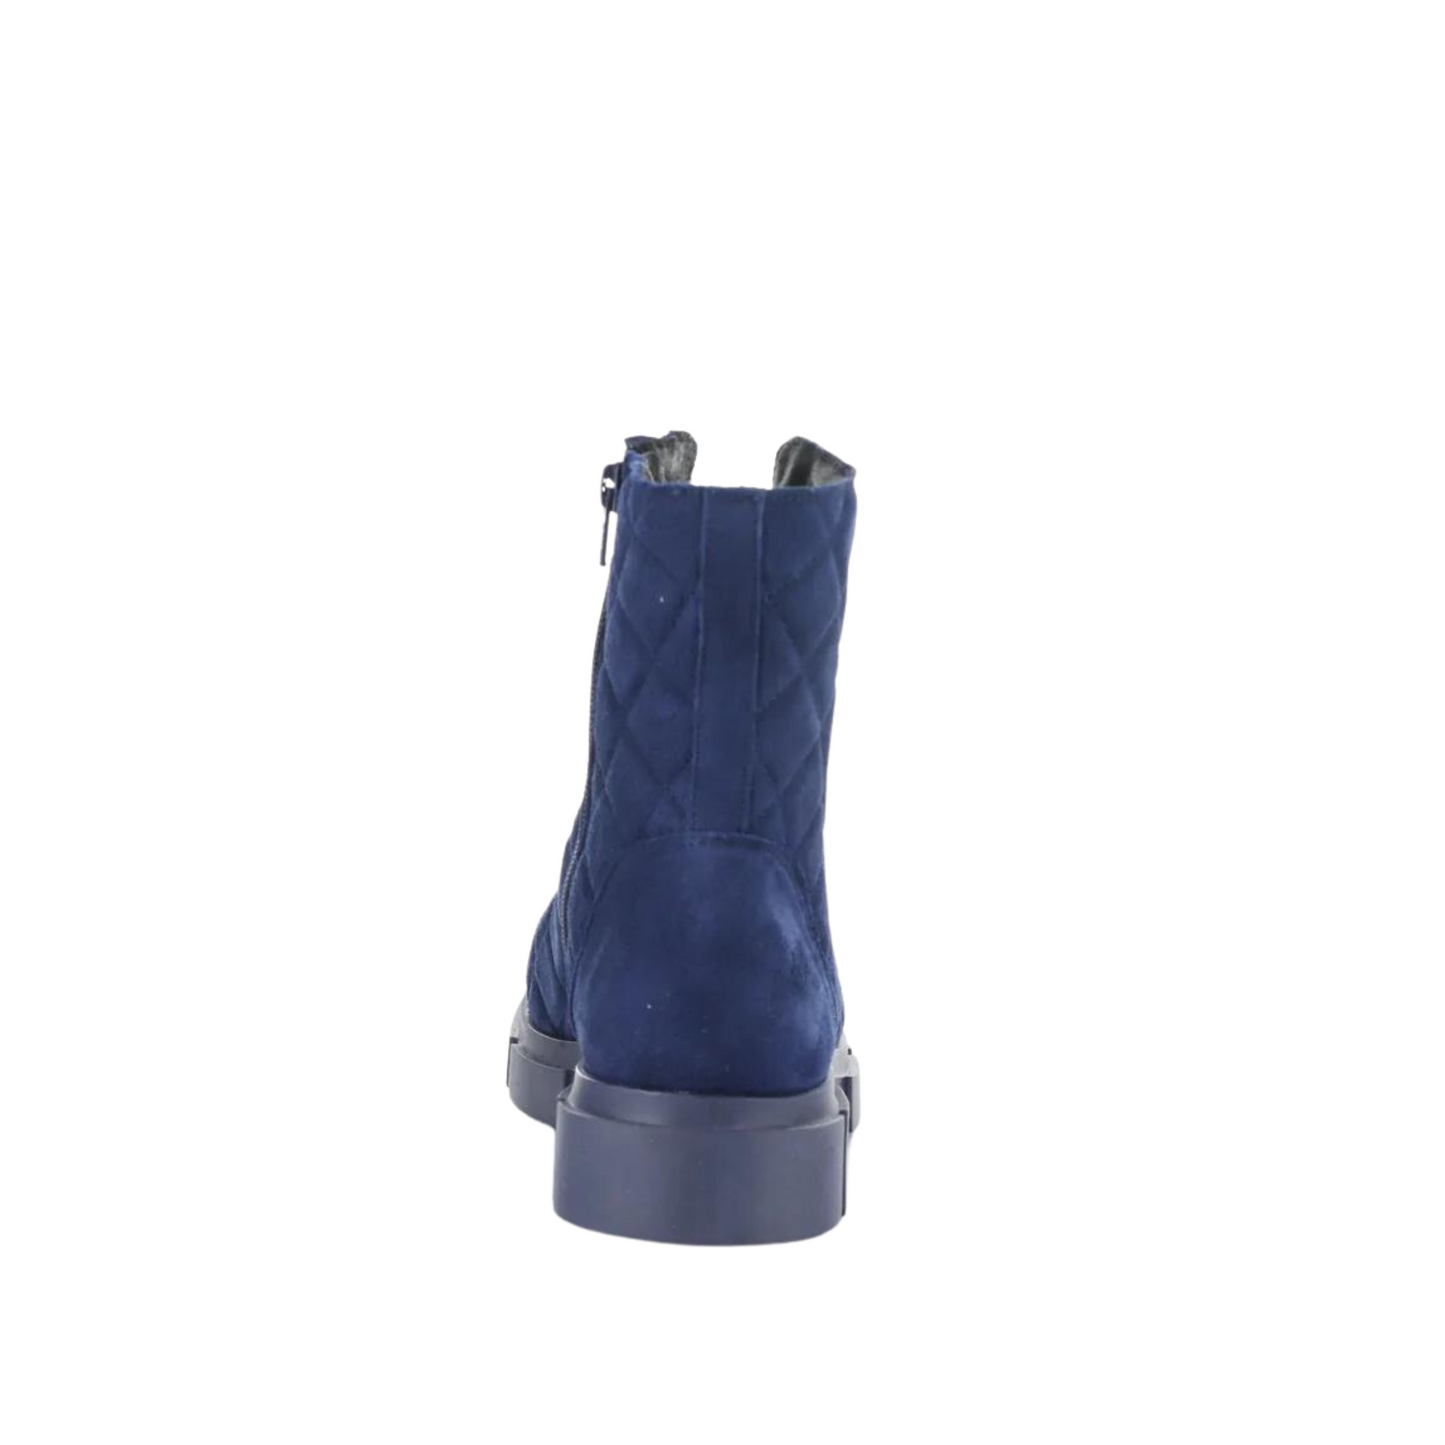 Rear profile of the Bos & Co. Lane Boot in the colour Navy.